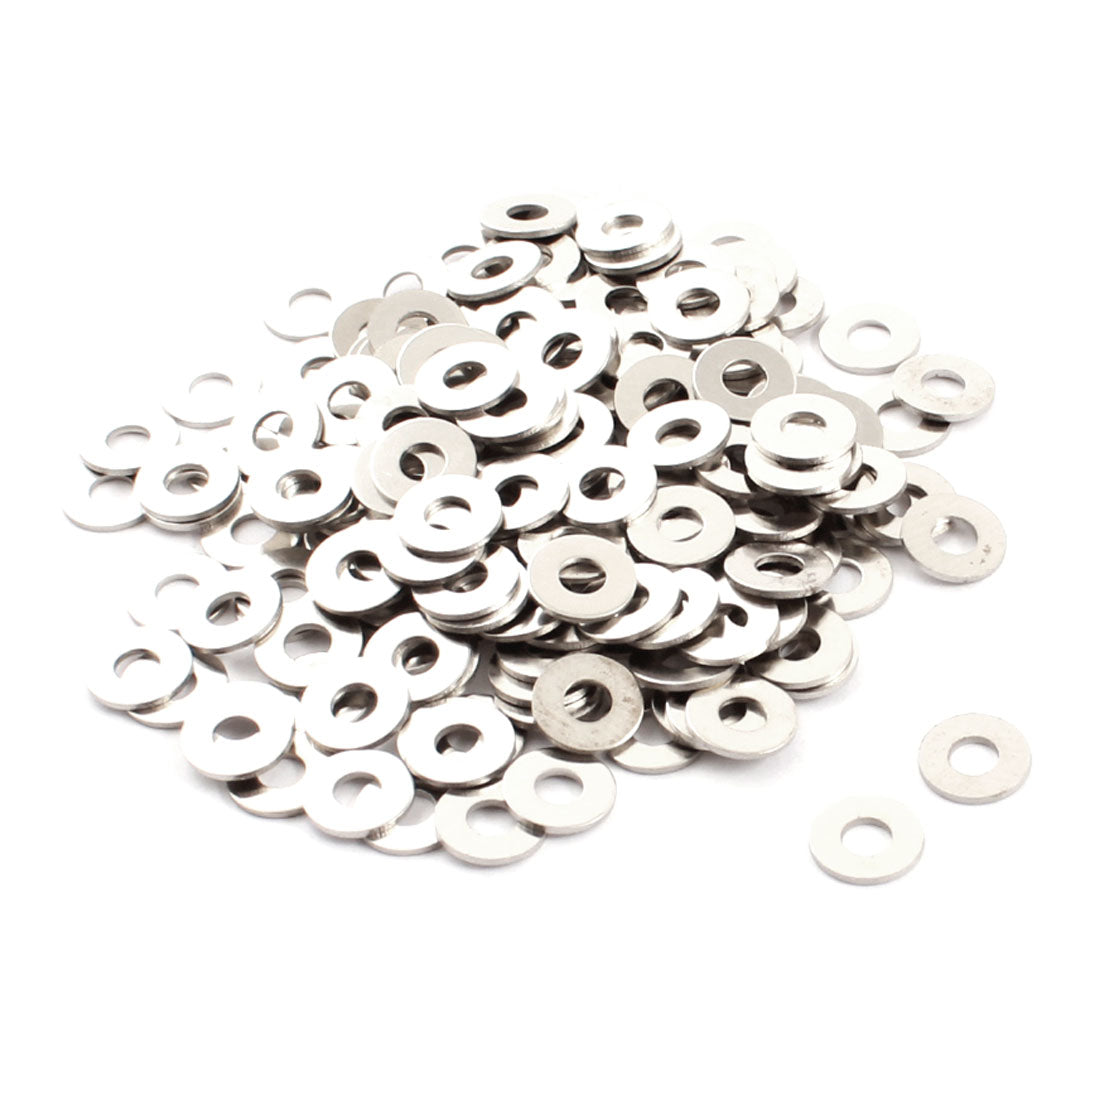 uxcell Uxcell 200Pcs 3mm x 7mm x 0.6mm Round Shaped Metal Washers Spacers Fasteners